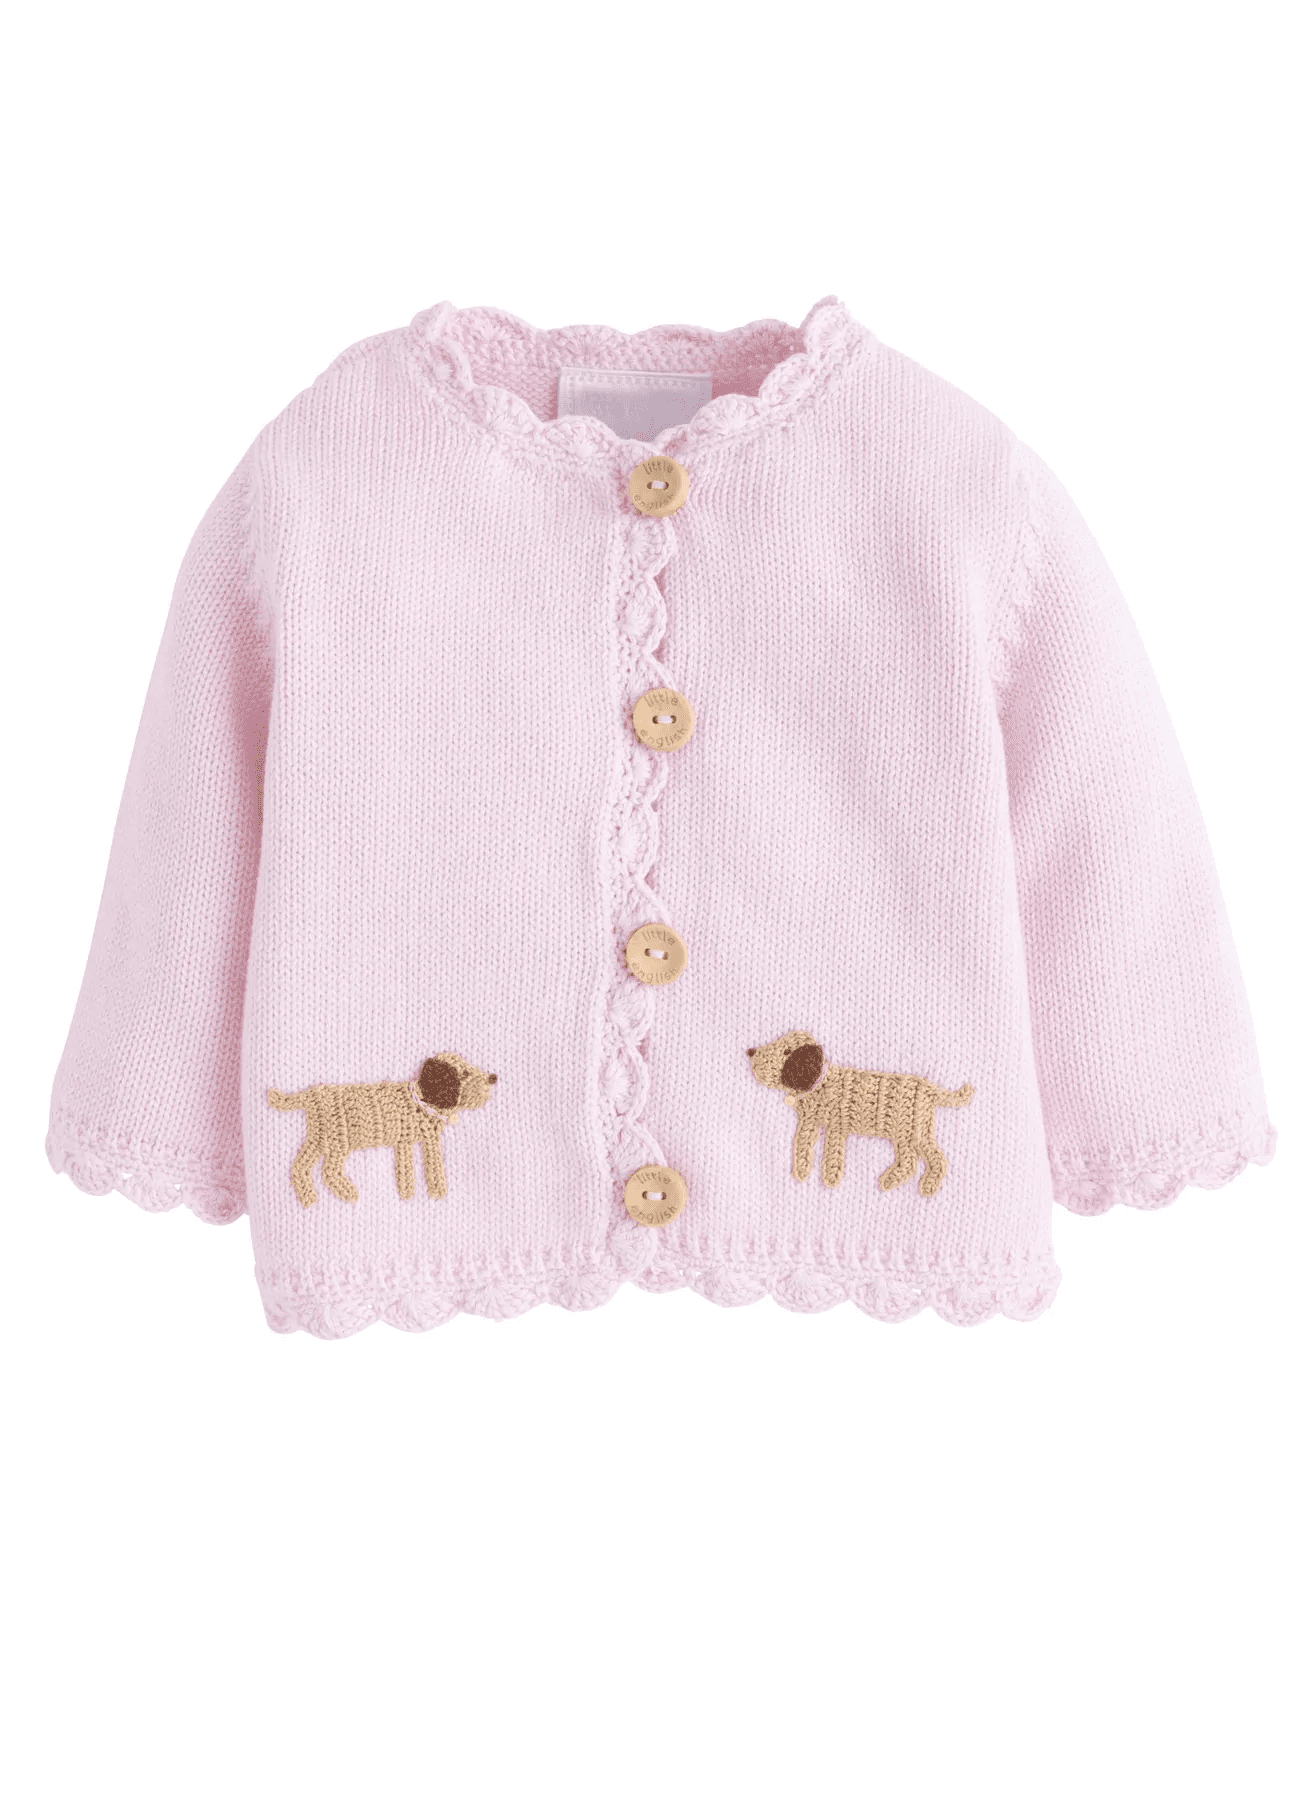 Girls Dog Sweater from Little English